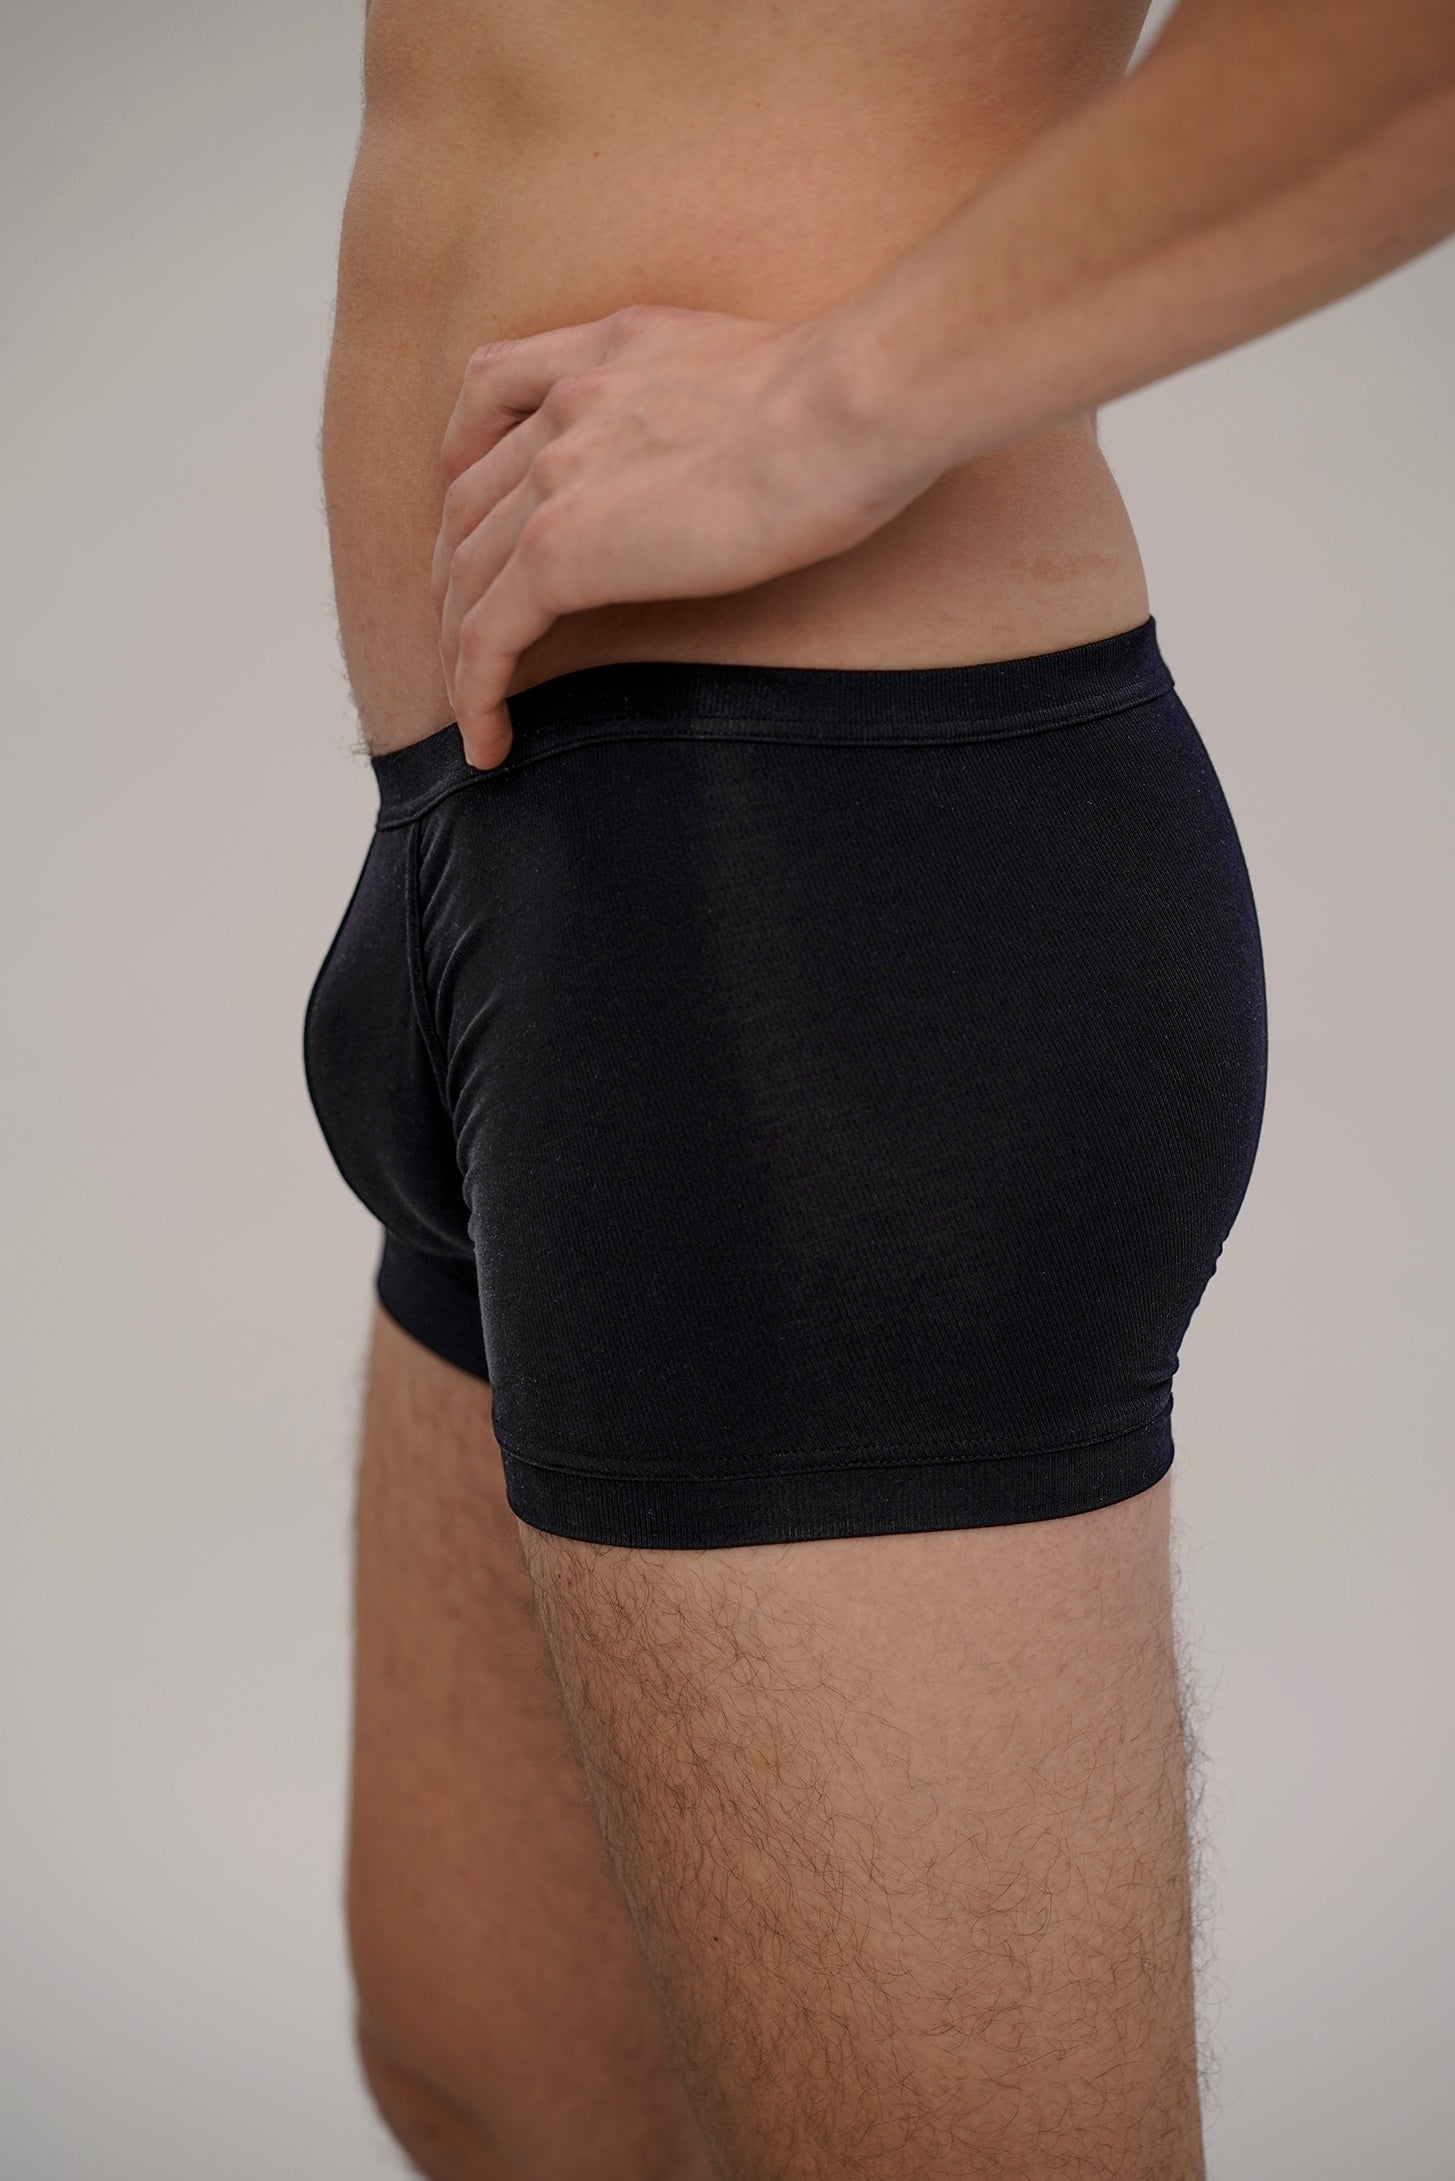 Boxer briefs / underpants in black made from natural MicroModal